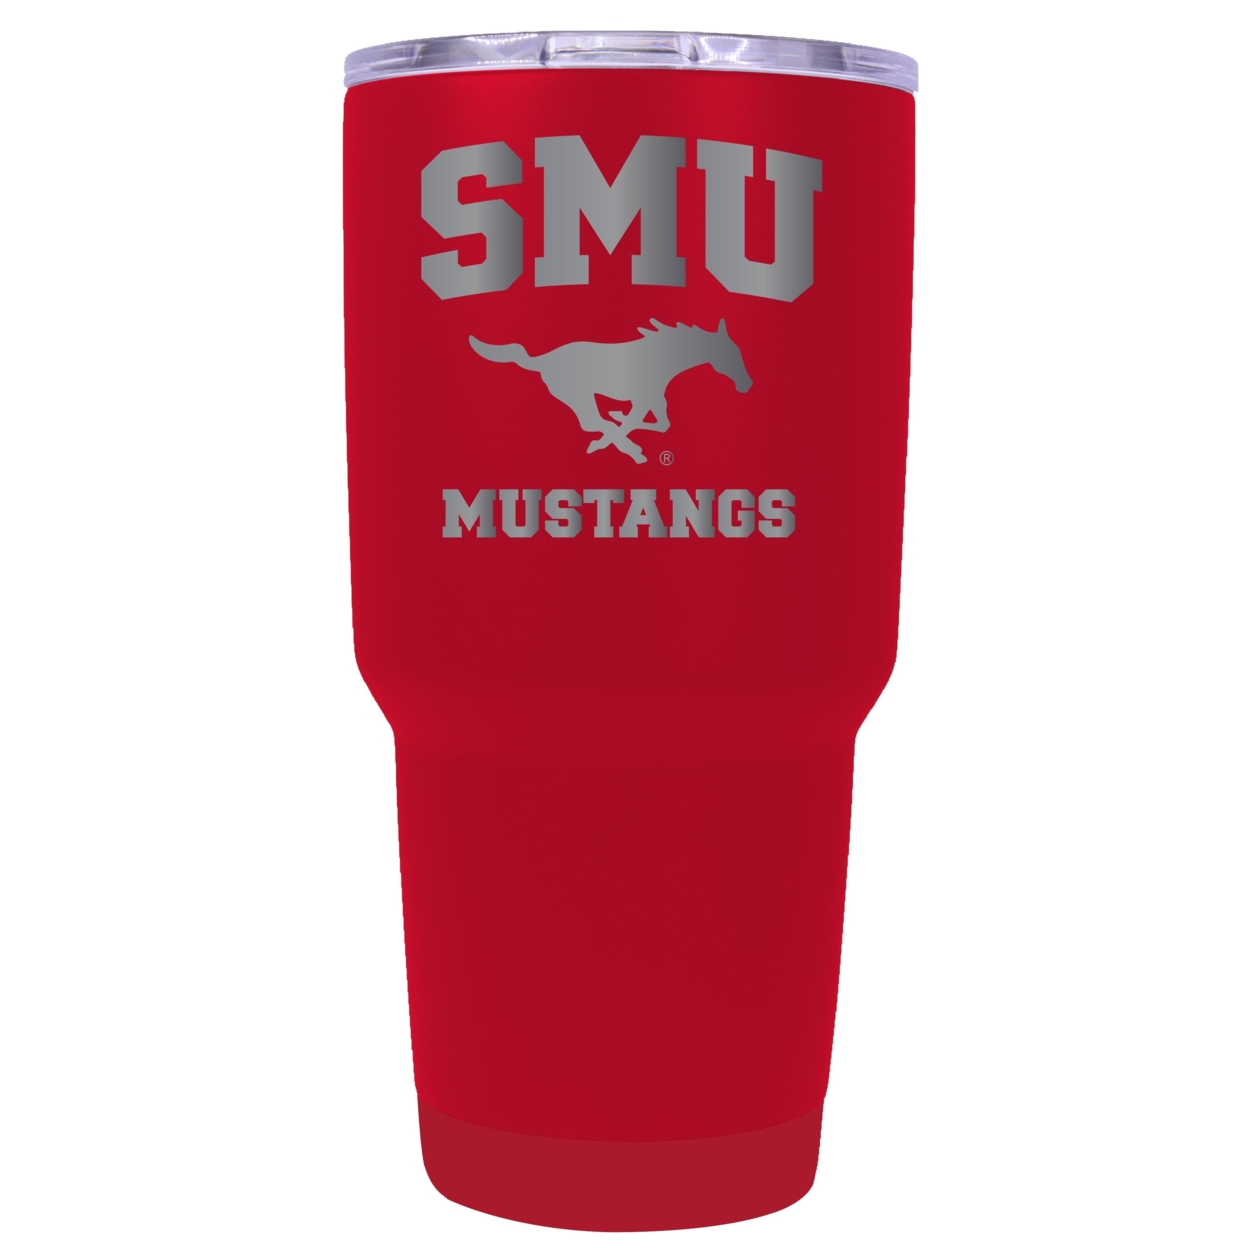 Southern Methodist University 24 Oz Laser Engraved Stainless Steel Insulated Tumbler - Choose Your Color. - Red